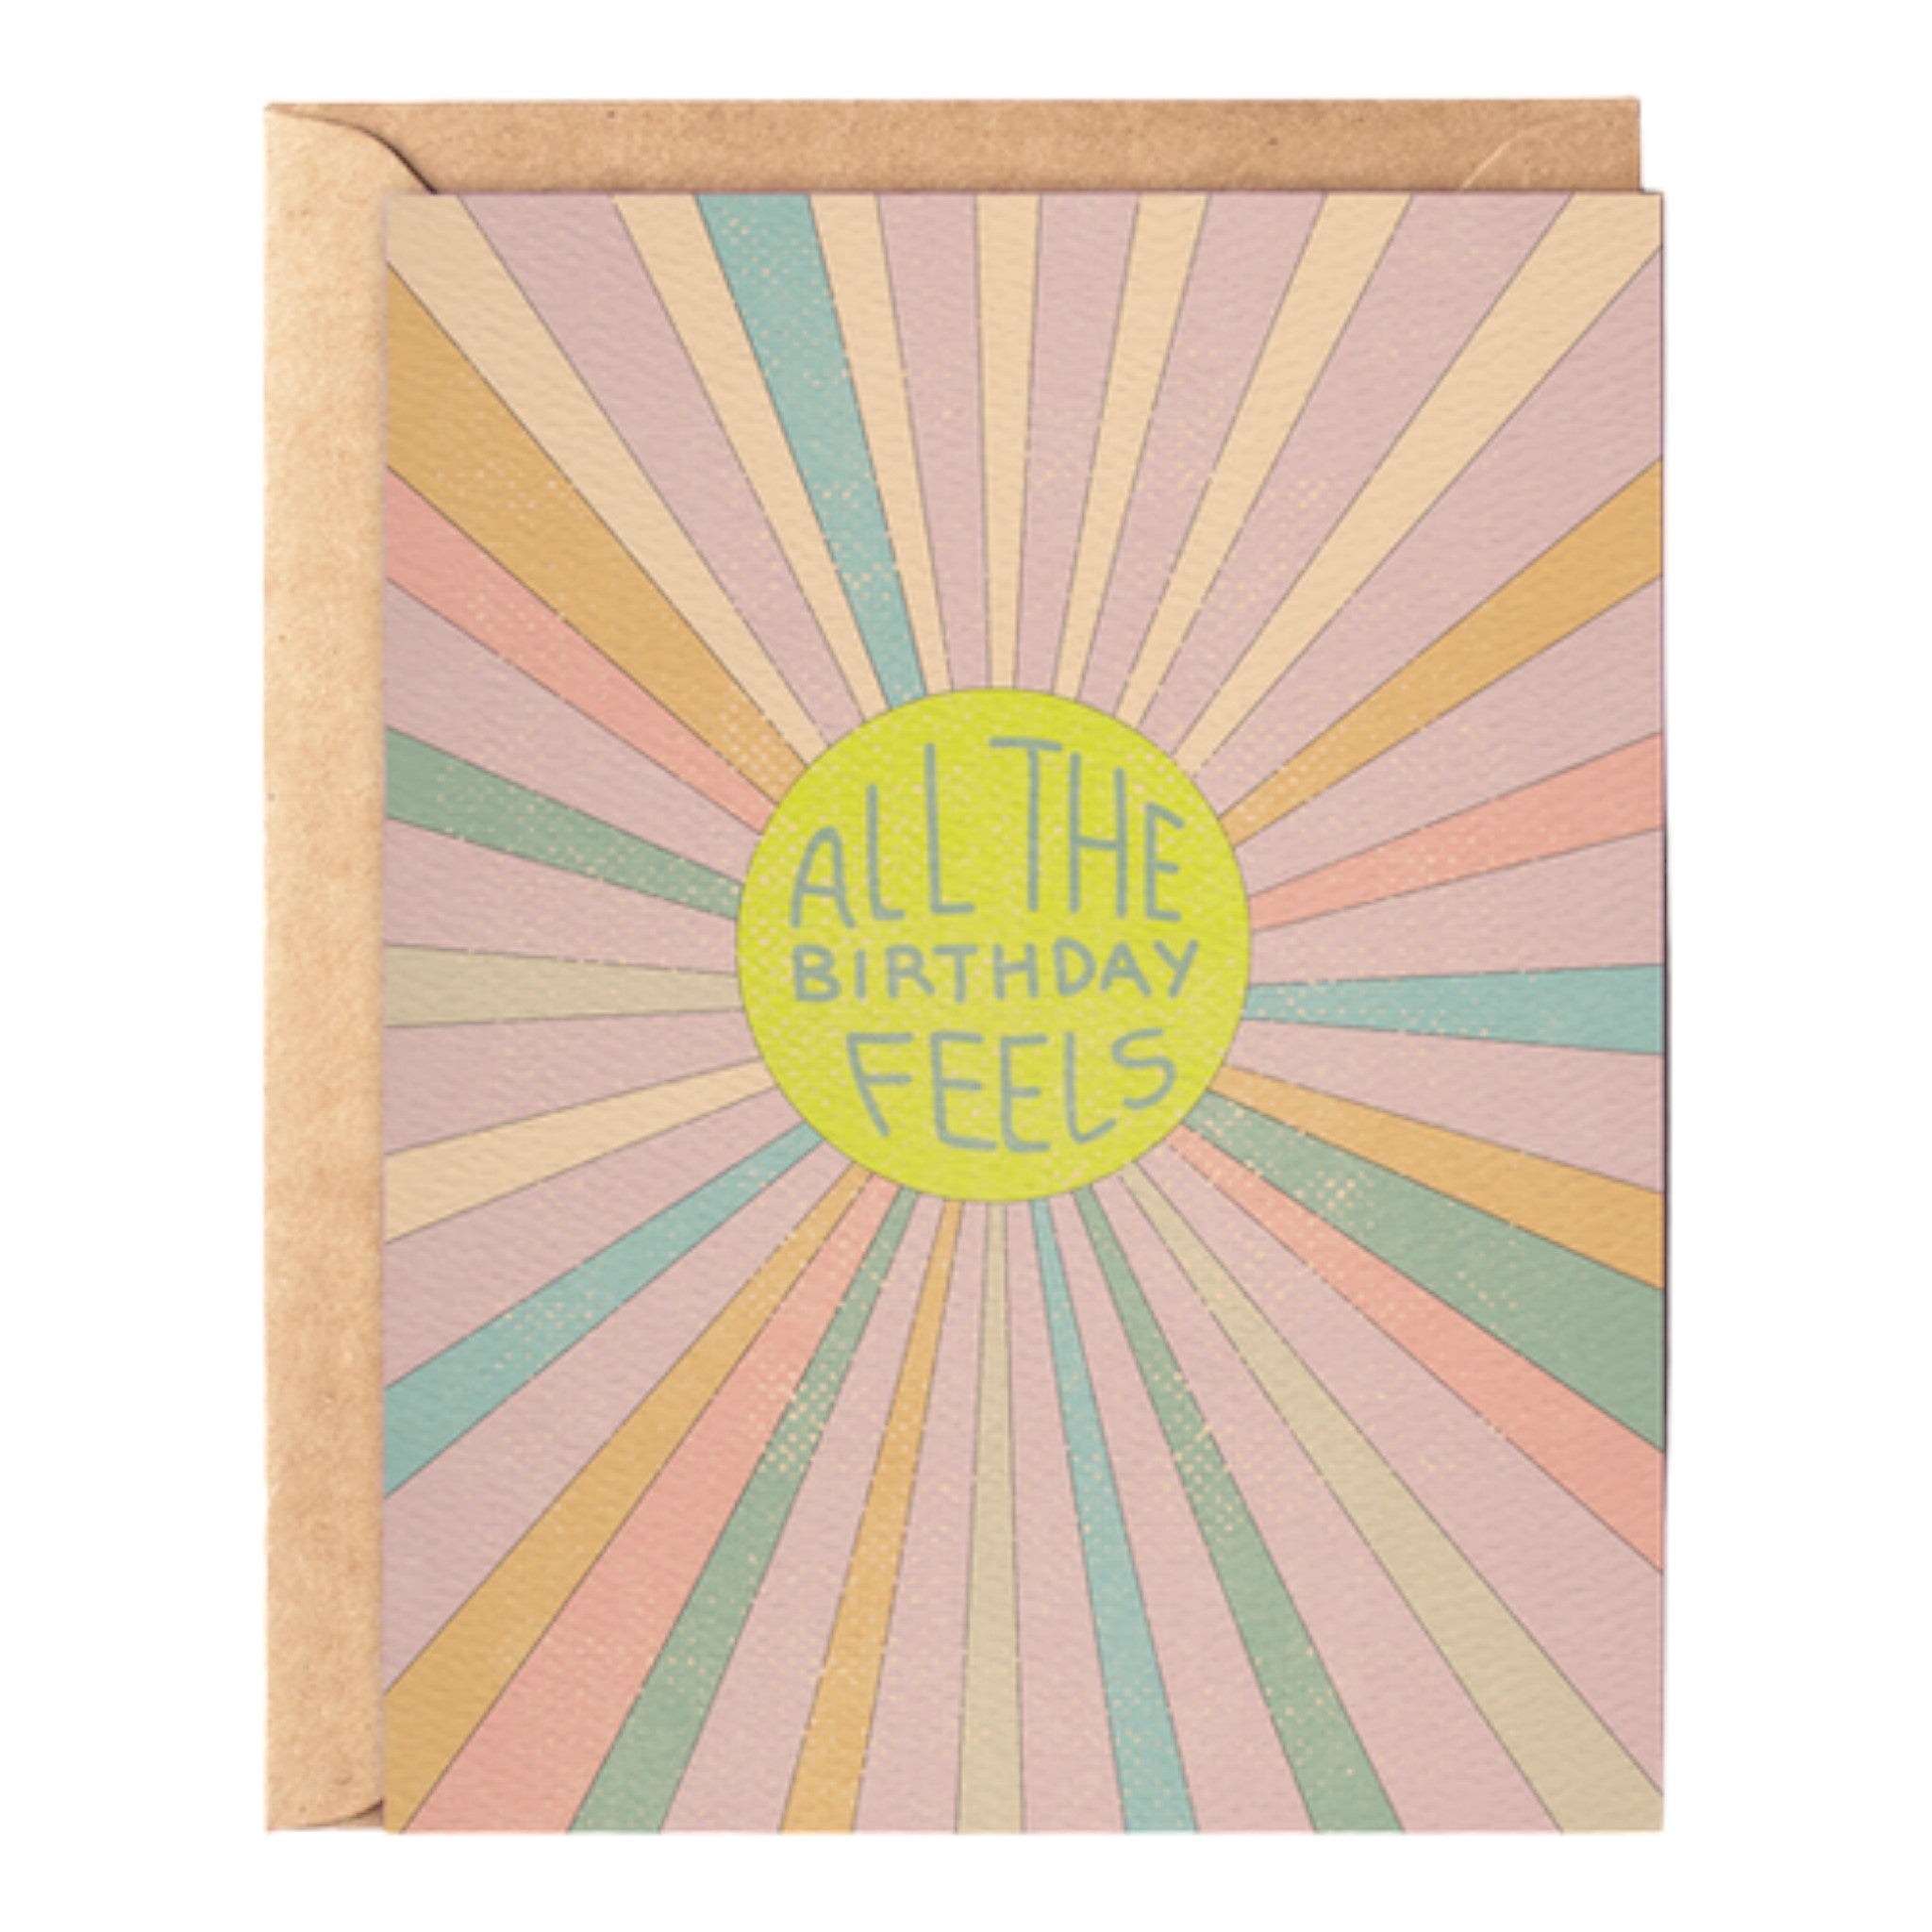 Daydream Prints - All The Birthday Feels Colorful Card